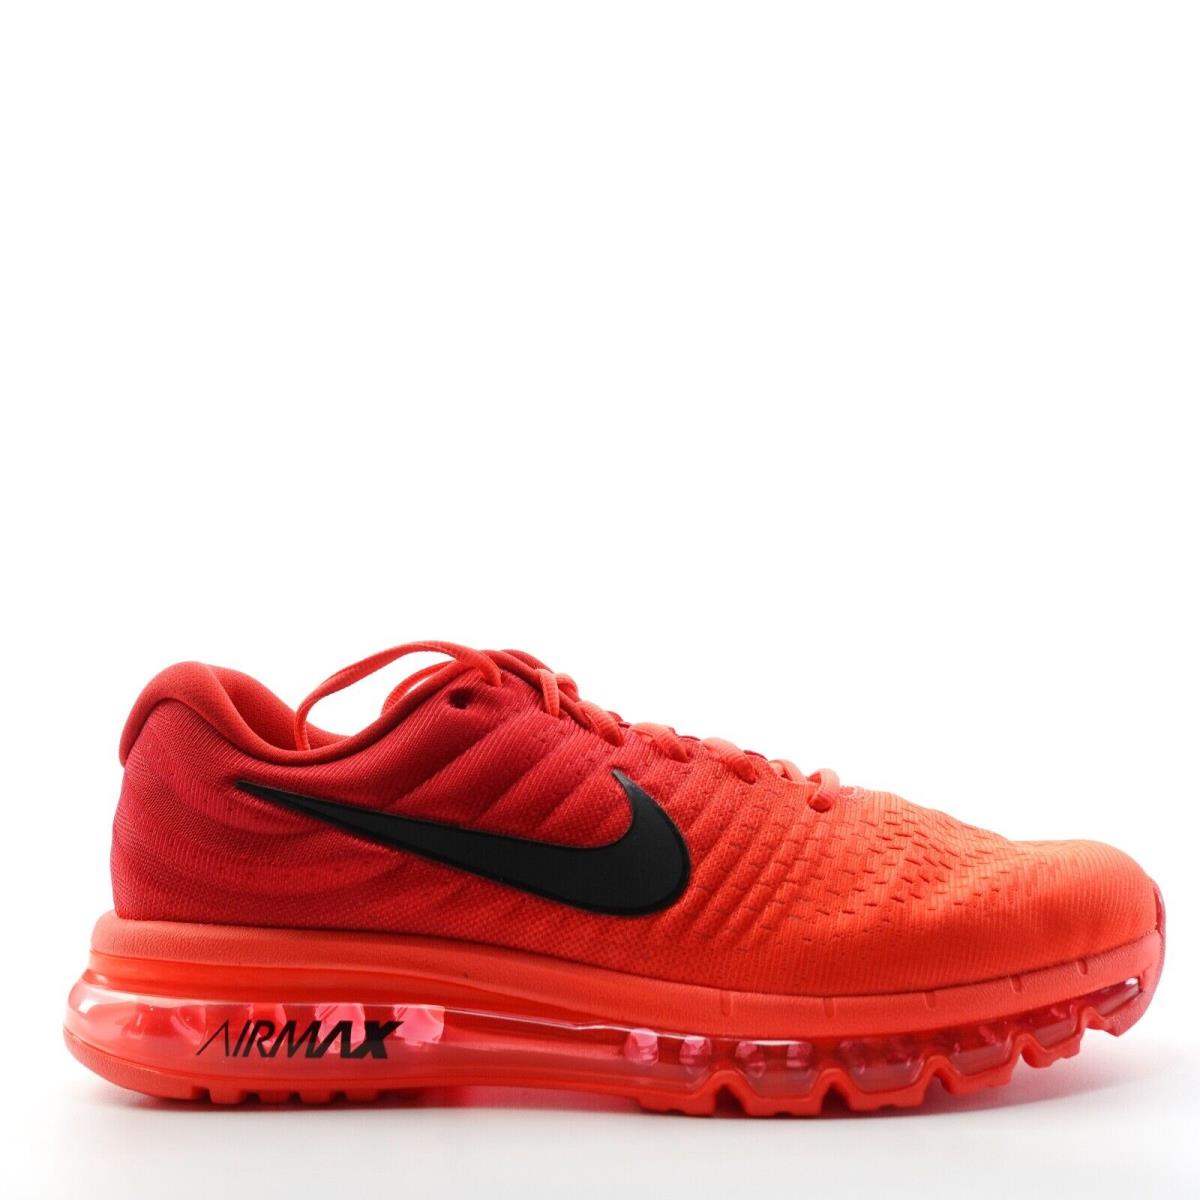 Nike Air Max 2017 Bright Crimson Red Running Shoes 849559 602 Mens Size 10